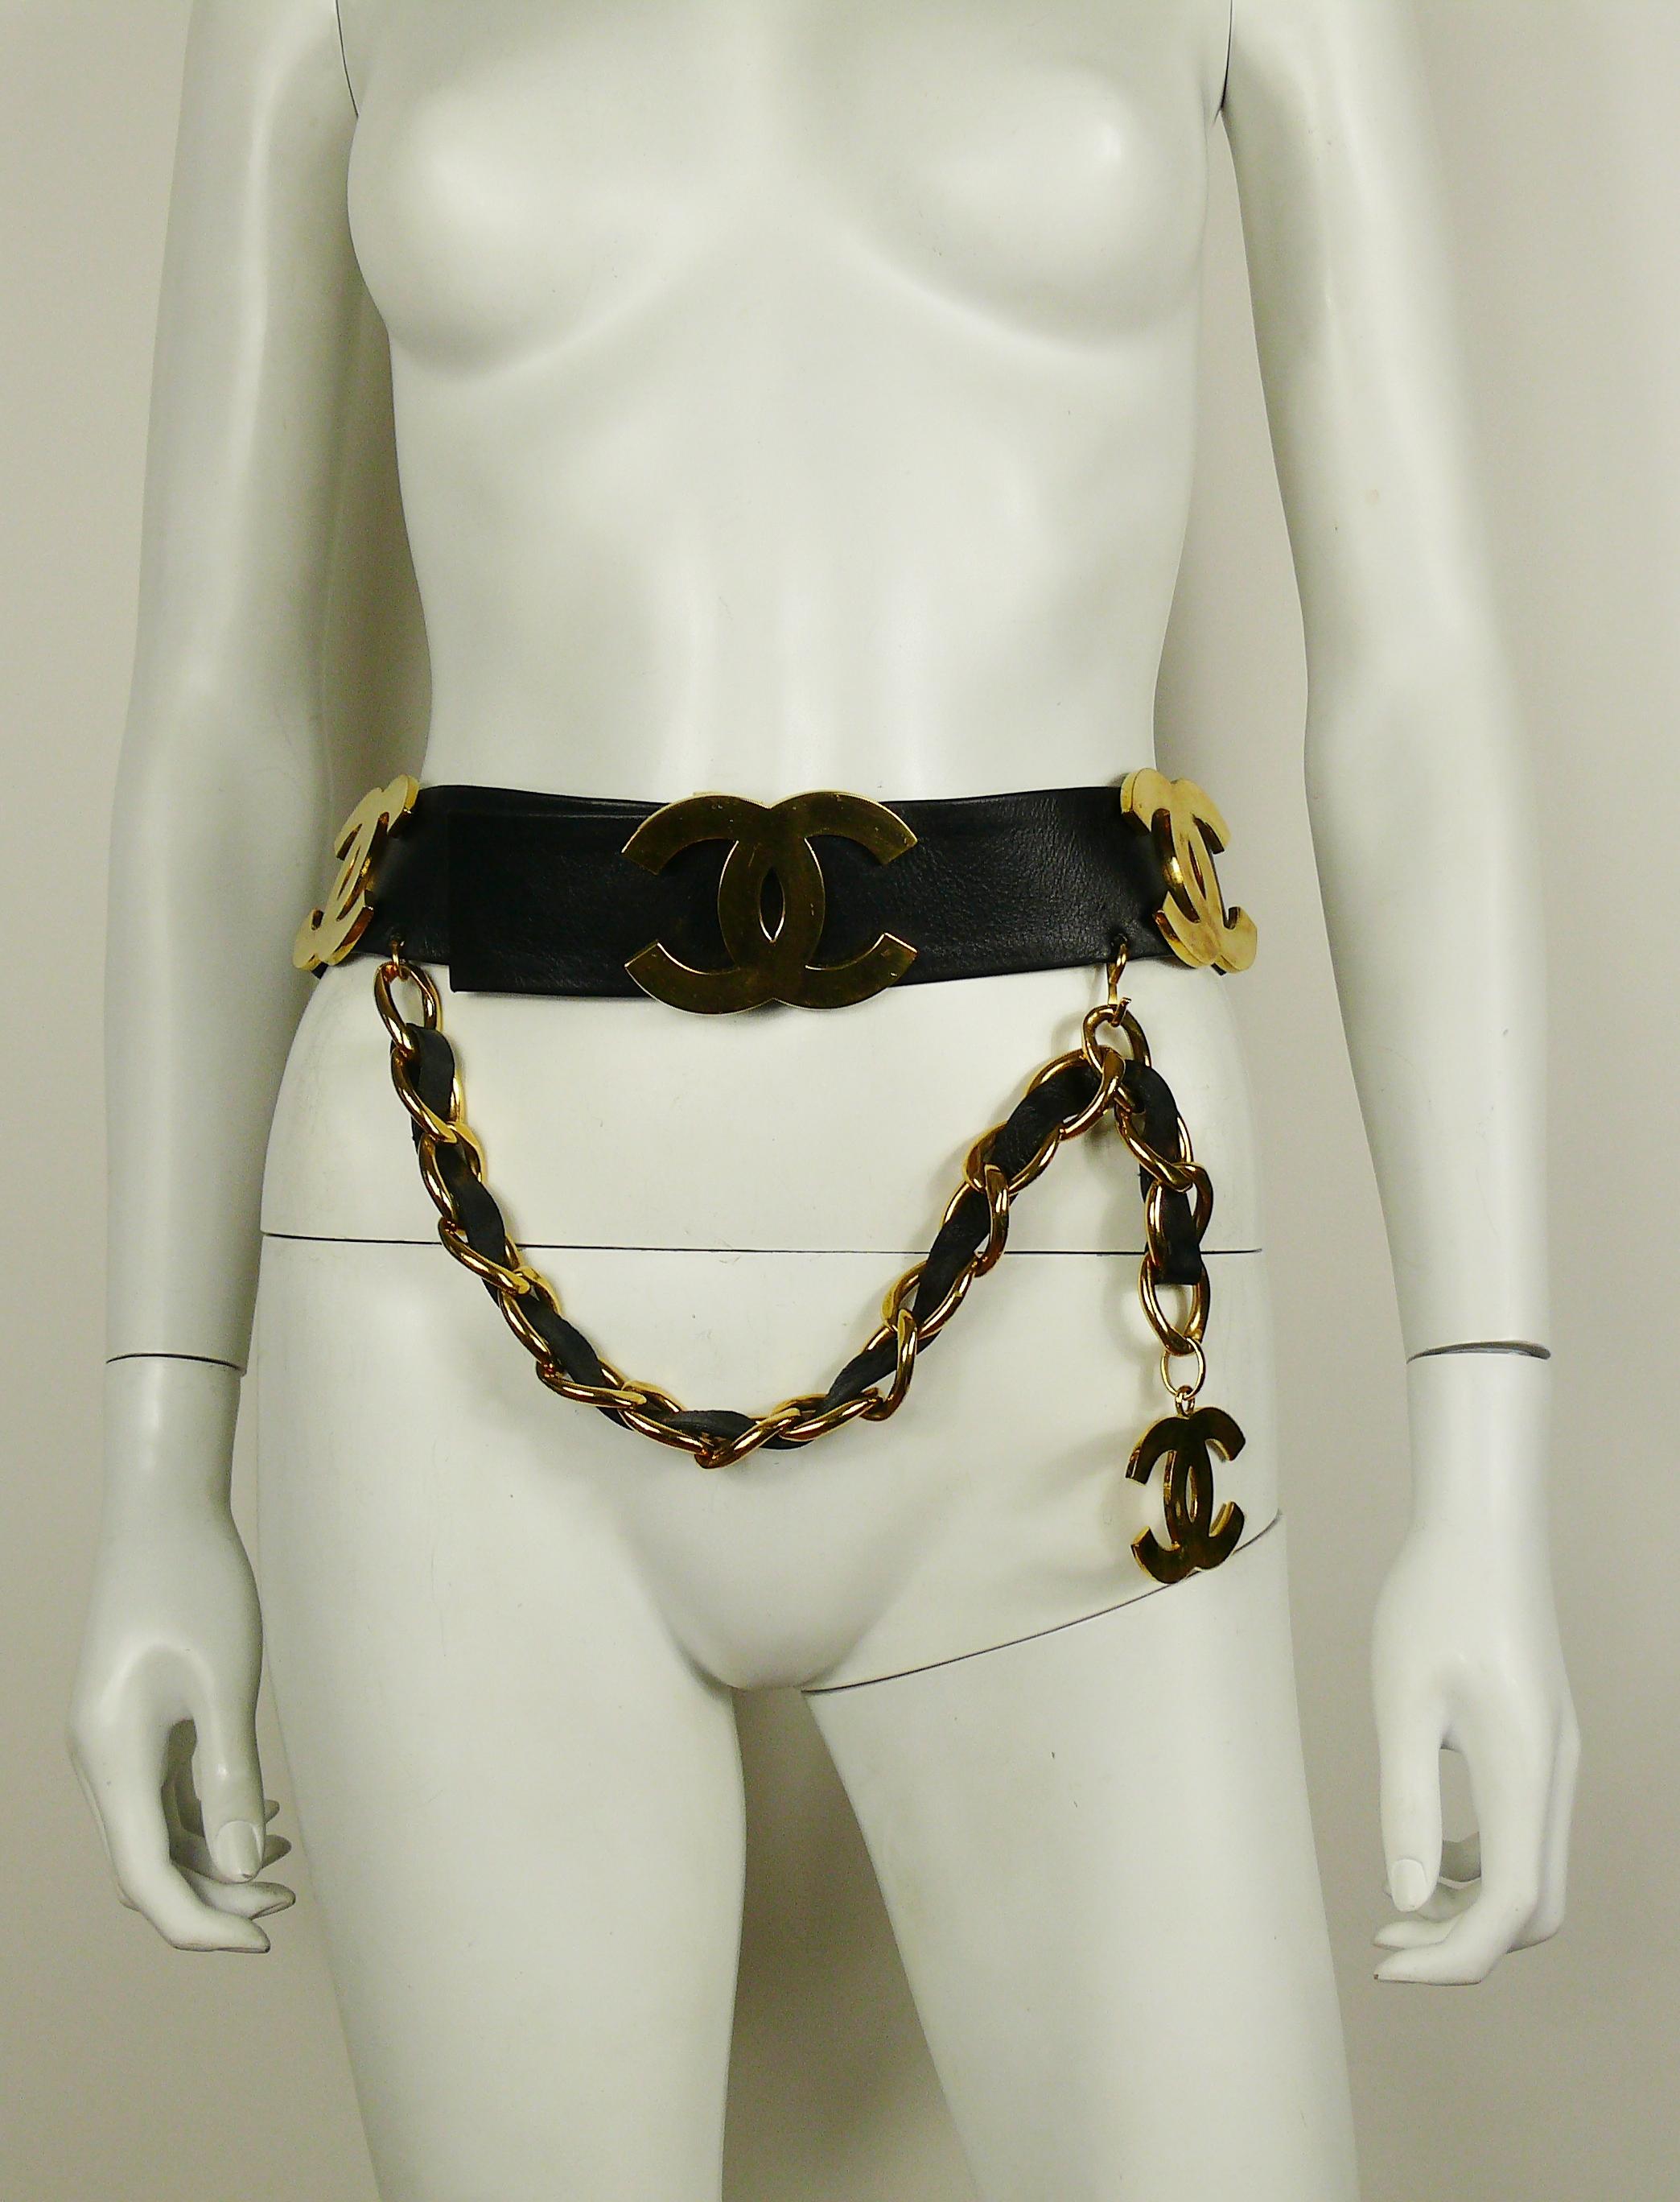 CHANEL vintage rare and iconic black leather wide belt featuring large gold toned CC logos and chain drop detail.

Collection n°29 (year 1994).

Marked CHANEL 2 9 Made in France.
80/32.

Indicative measurements : length (from holes to buckle snap)